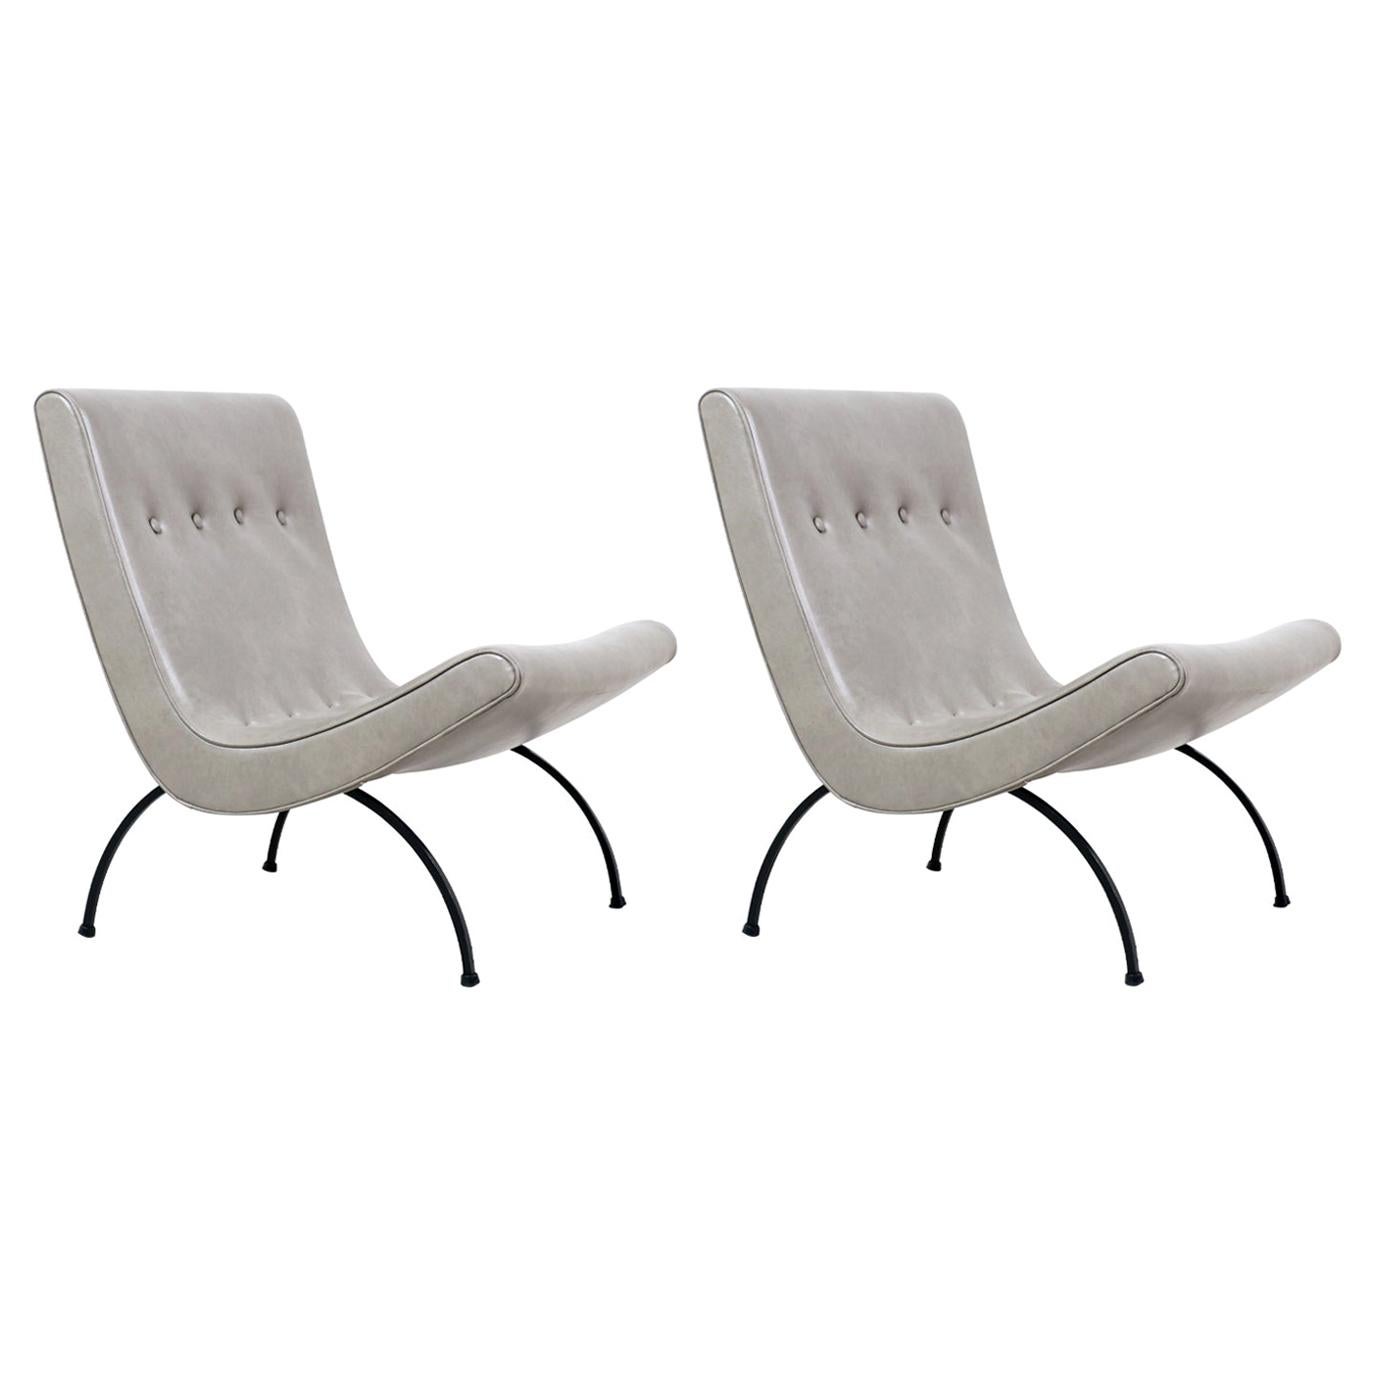 Milo Baughman "Scoop" Leather & Iron Lounge Chairs for Thayer Coggin